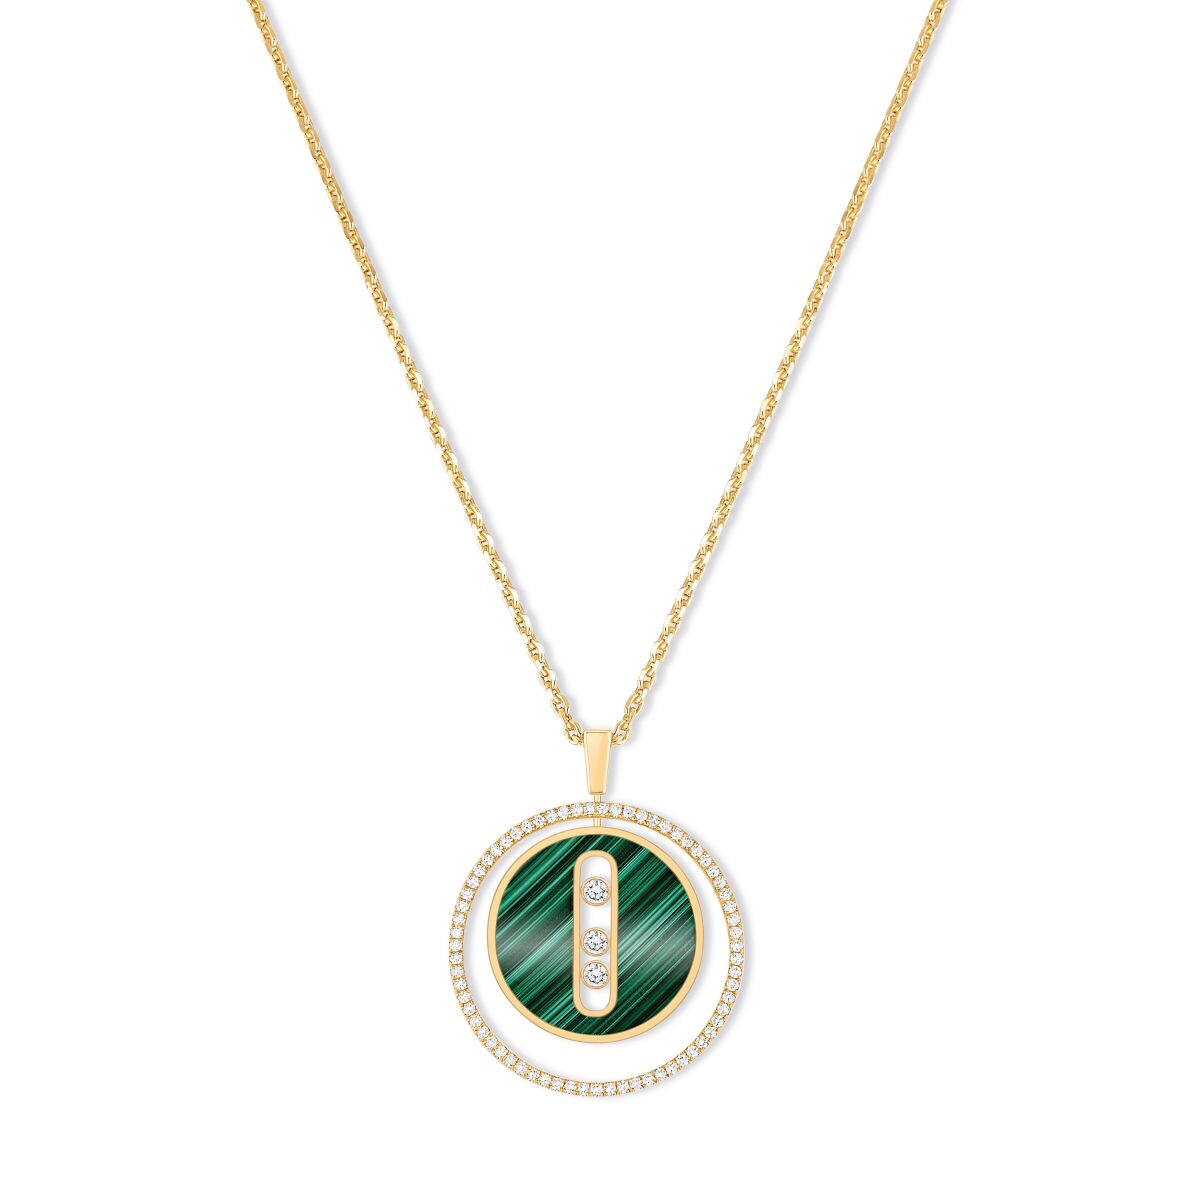 Collier Lucky Move necklace in malachite, diamond and yellow gold